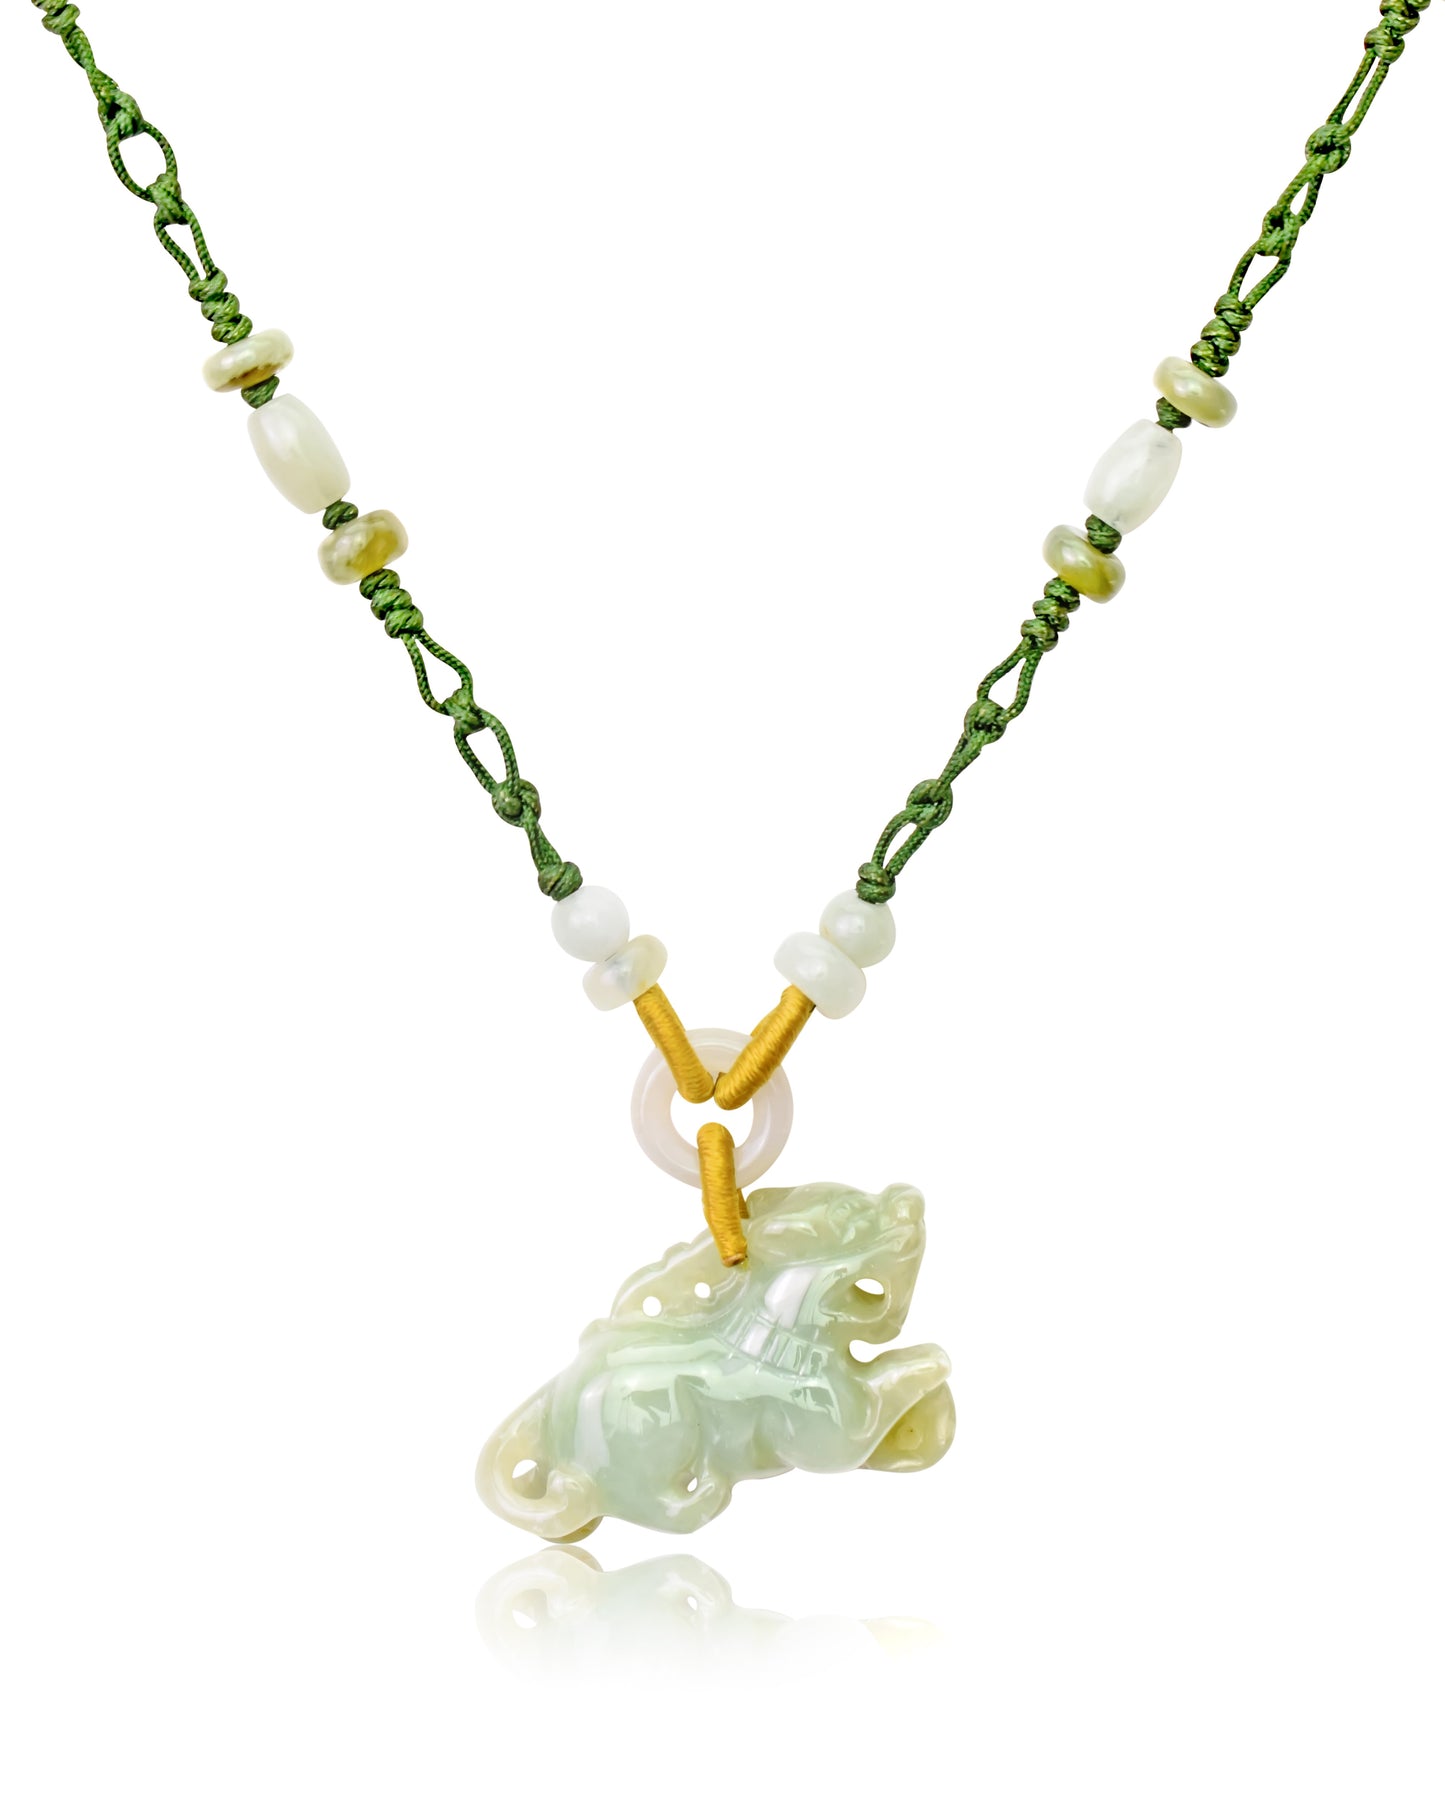 Unleash Your Inner Lion with a Handmade Jade Pendant made with Green Cord